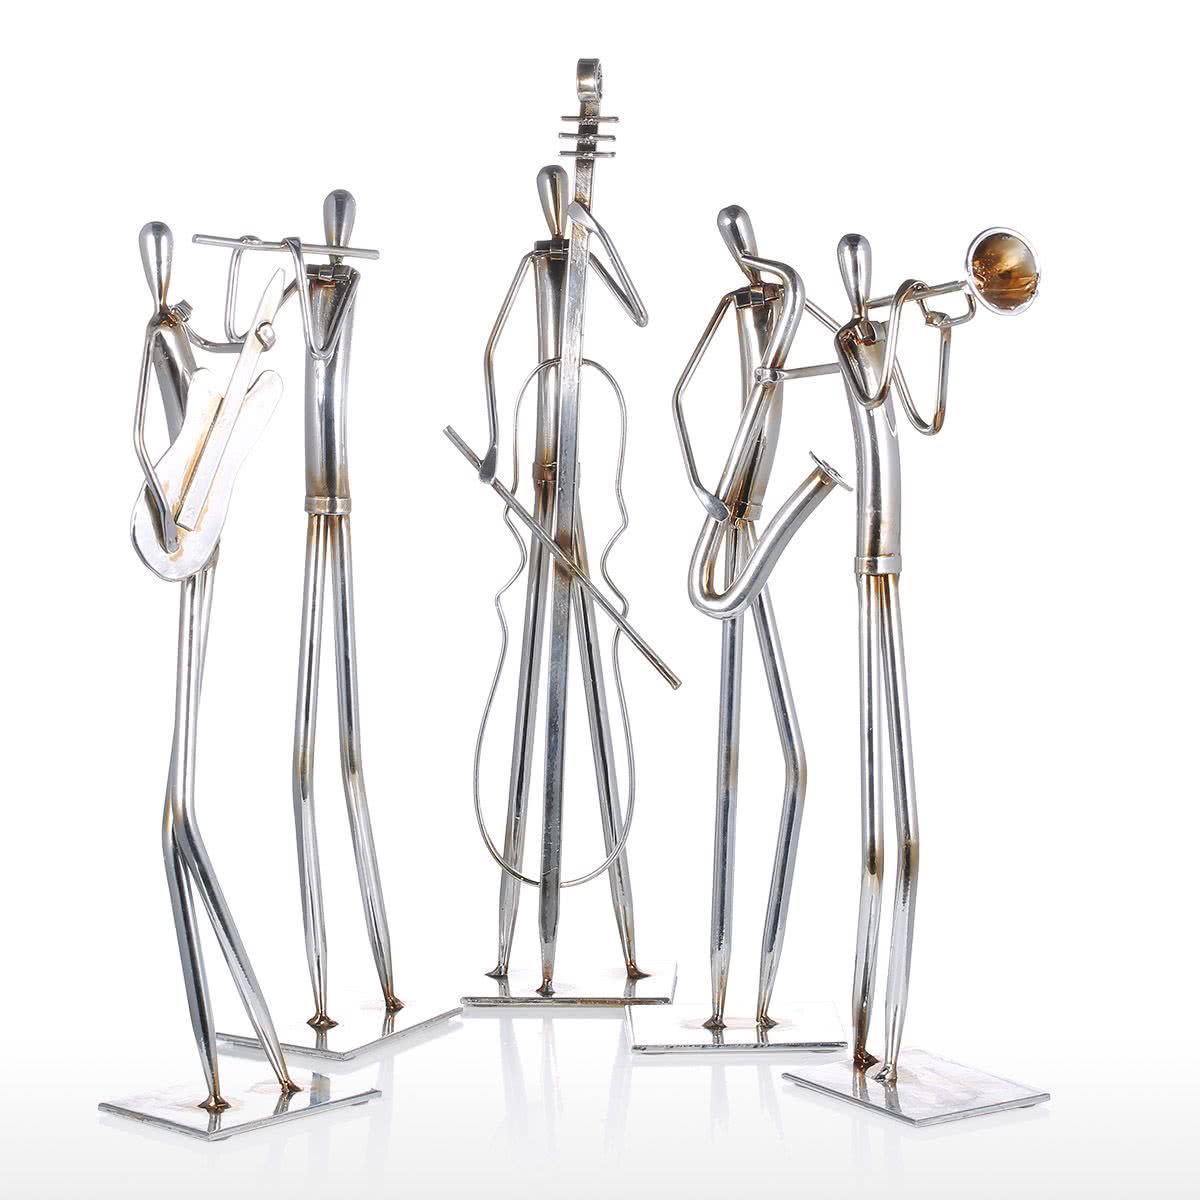 Music Related Gifts and Music Themed Gifts with Cello and Flute, Guitar and Saxophone 